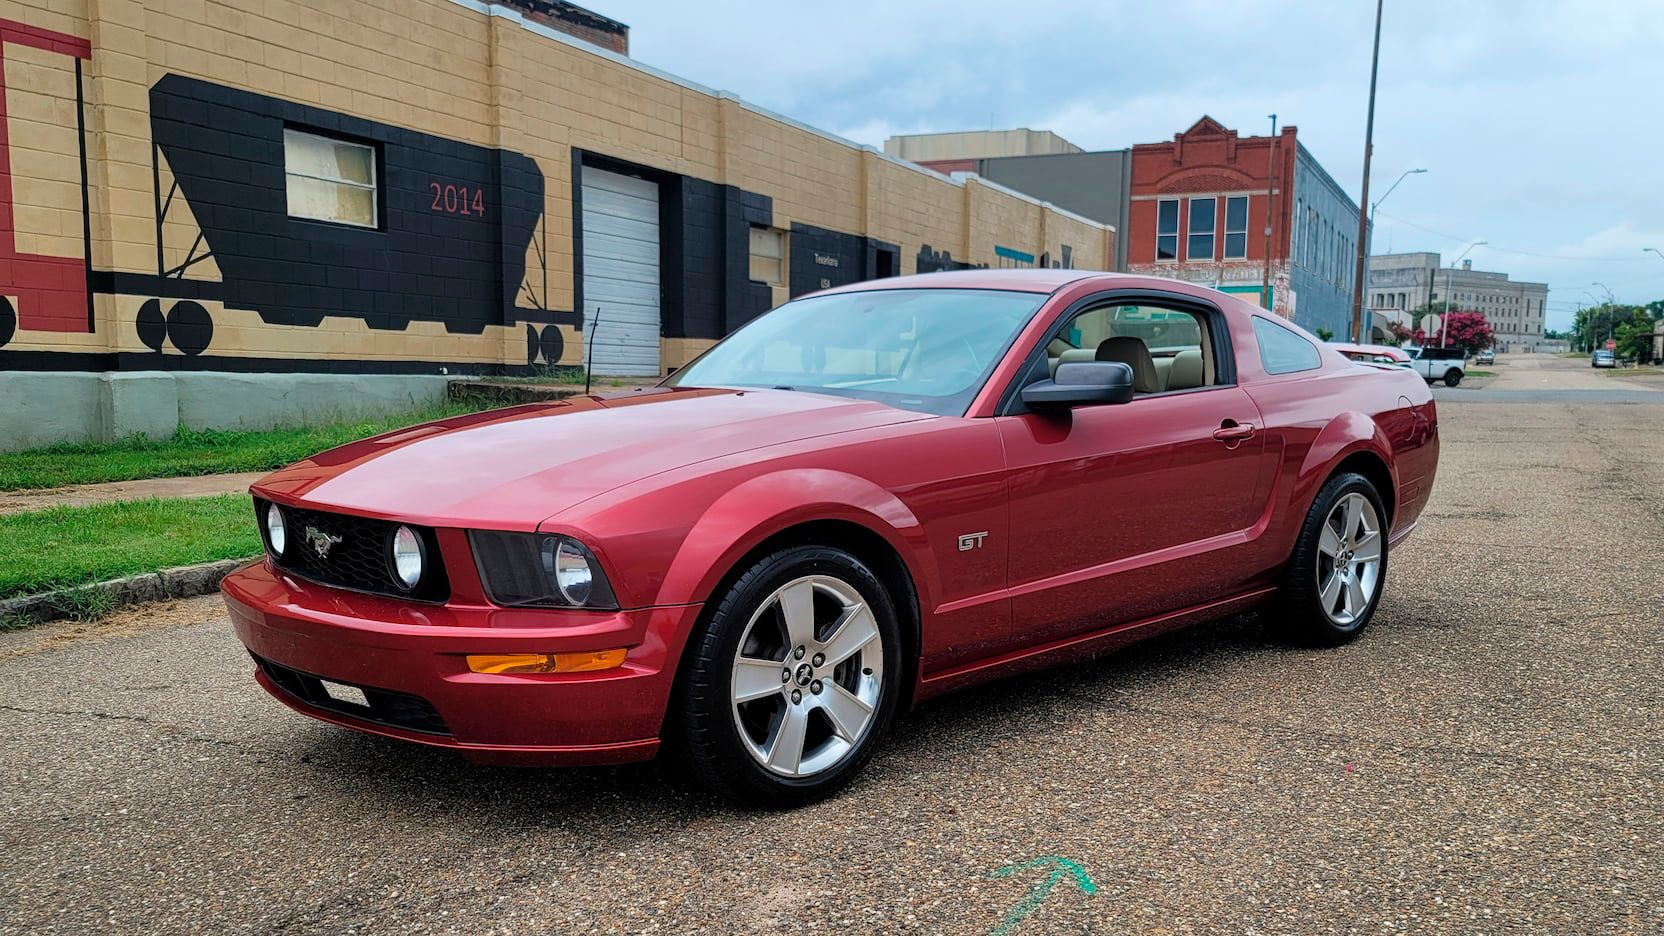 2007 Ford Mustang GT Parked